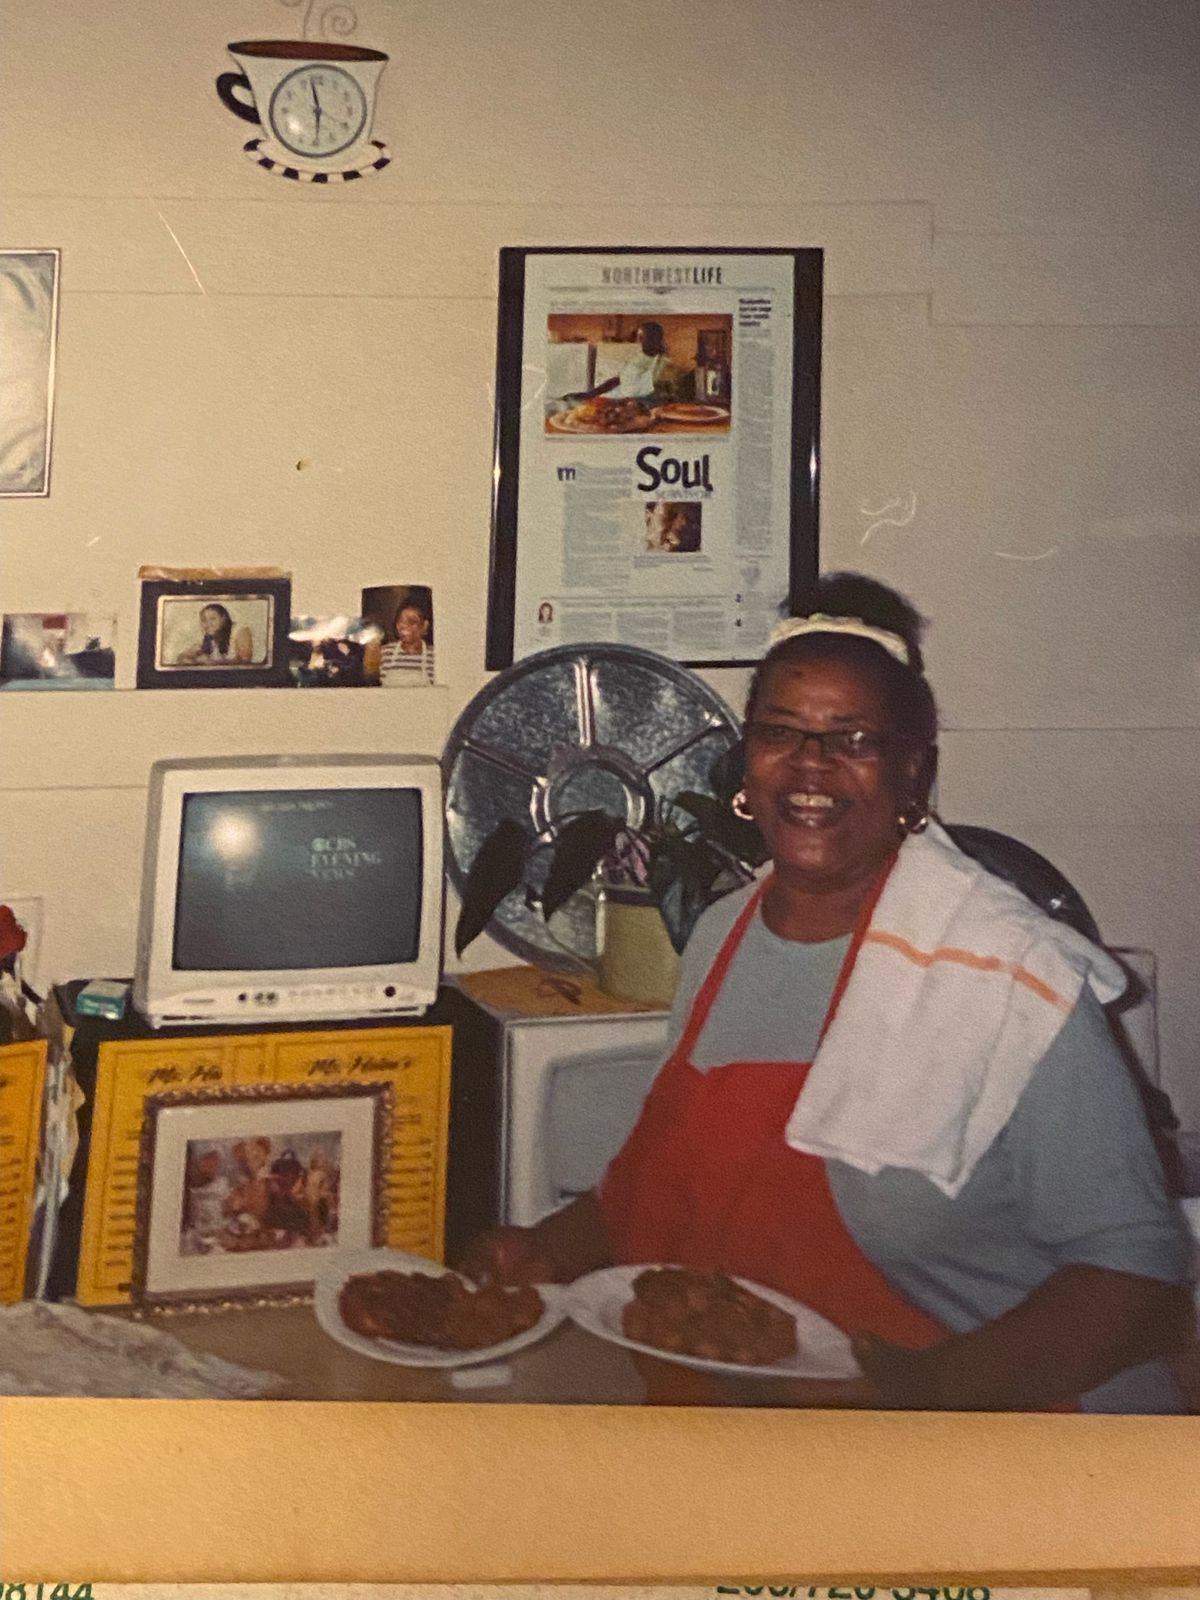 A woman stands holding two plates of food in a diner.